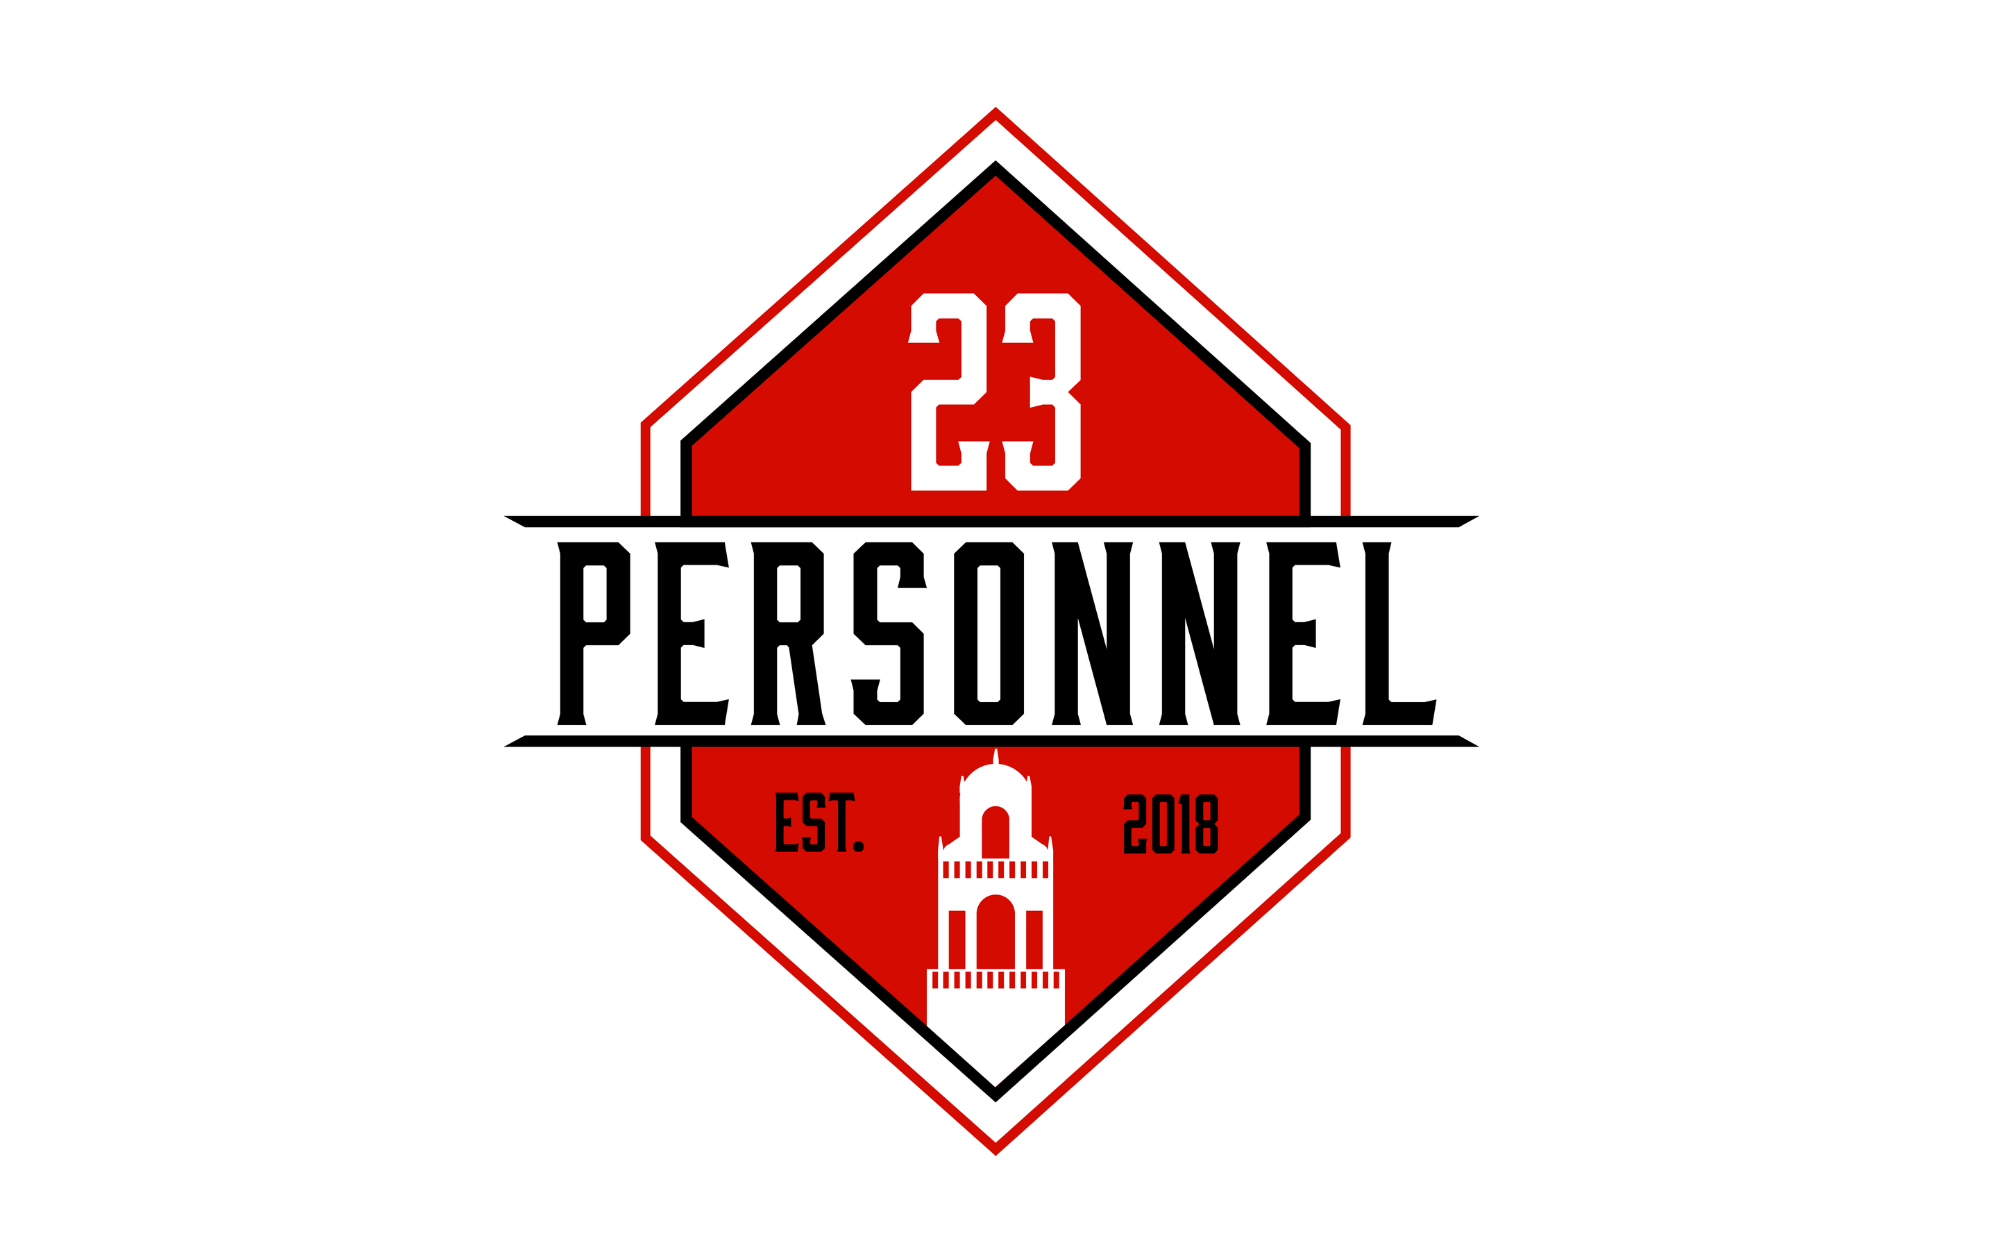 Ole Miss Rebels Preview & Christmas Recap  |  23 Personnel Podcast